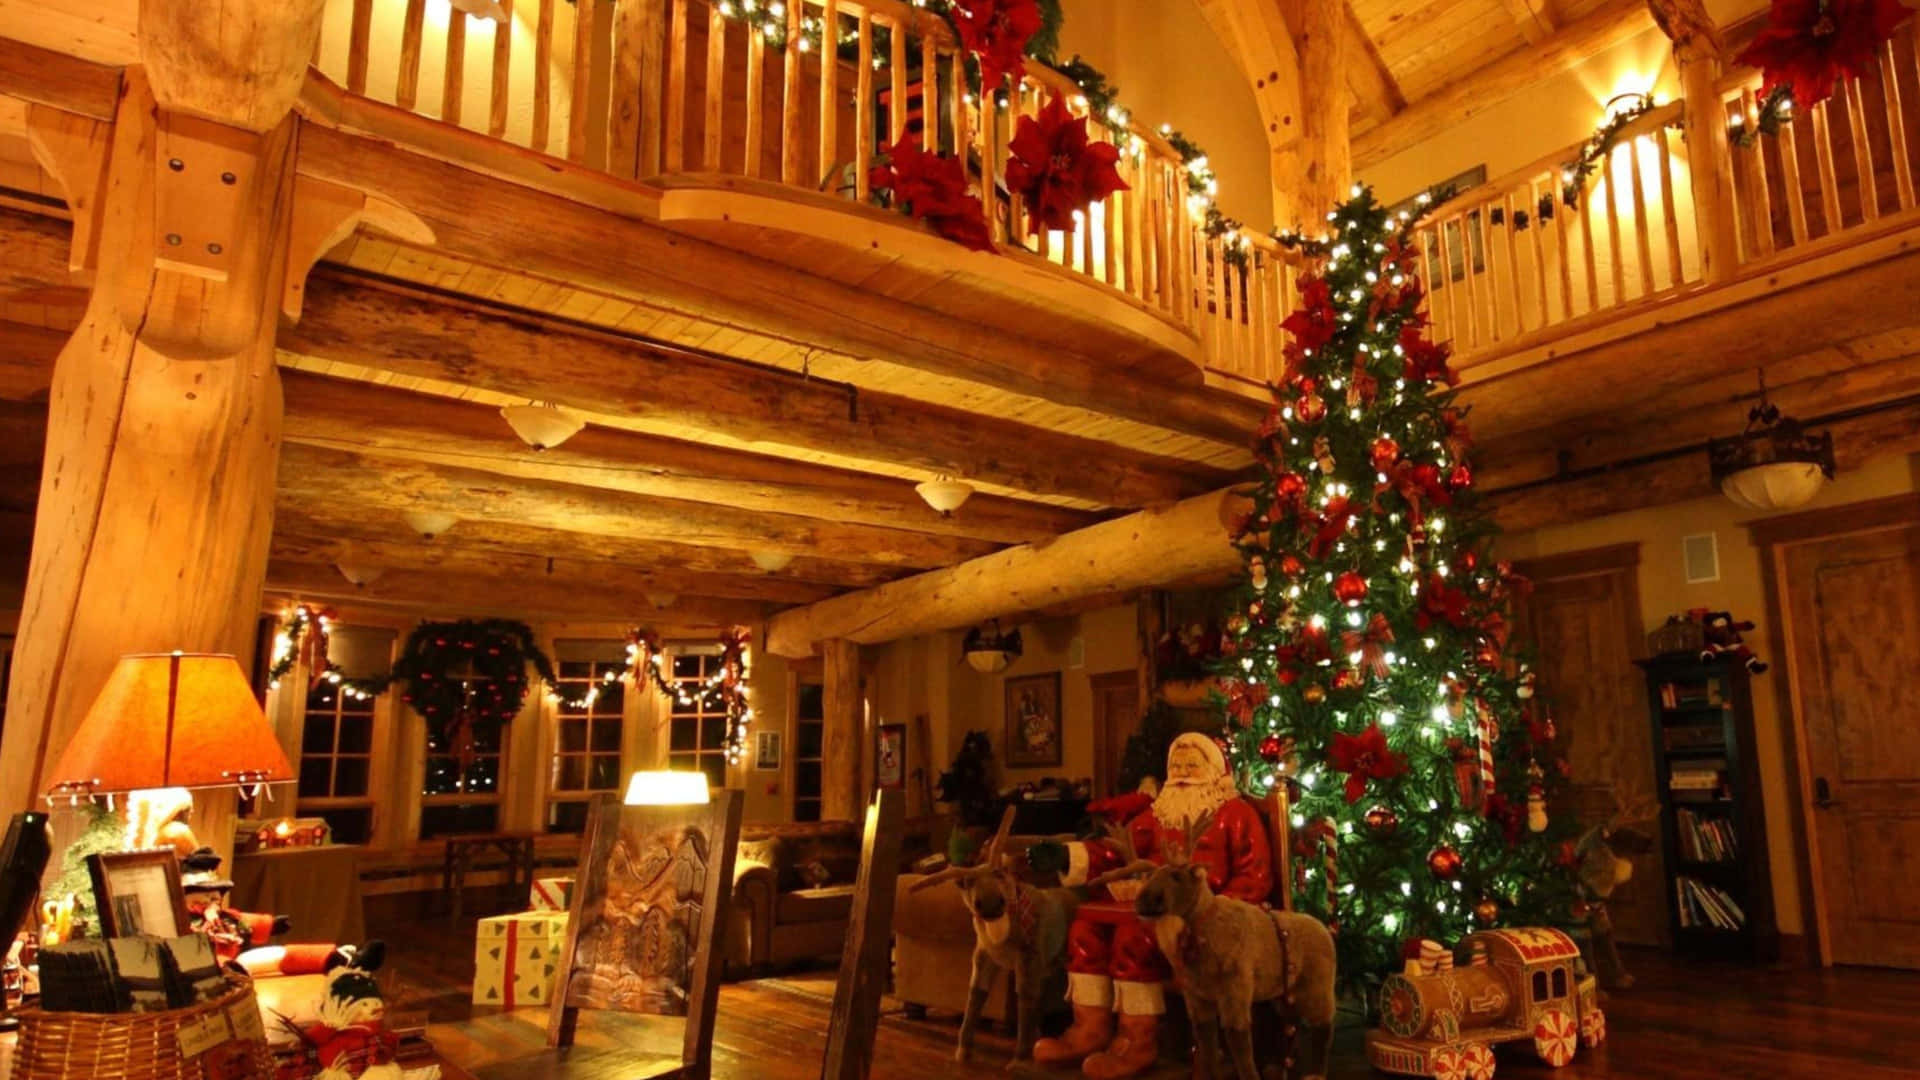 "Celebrate the holidays with a cosy, rustic Christmas"